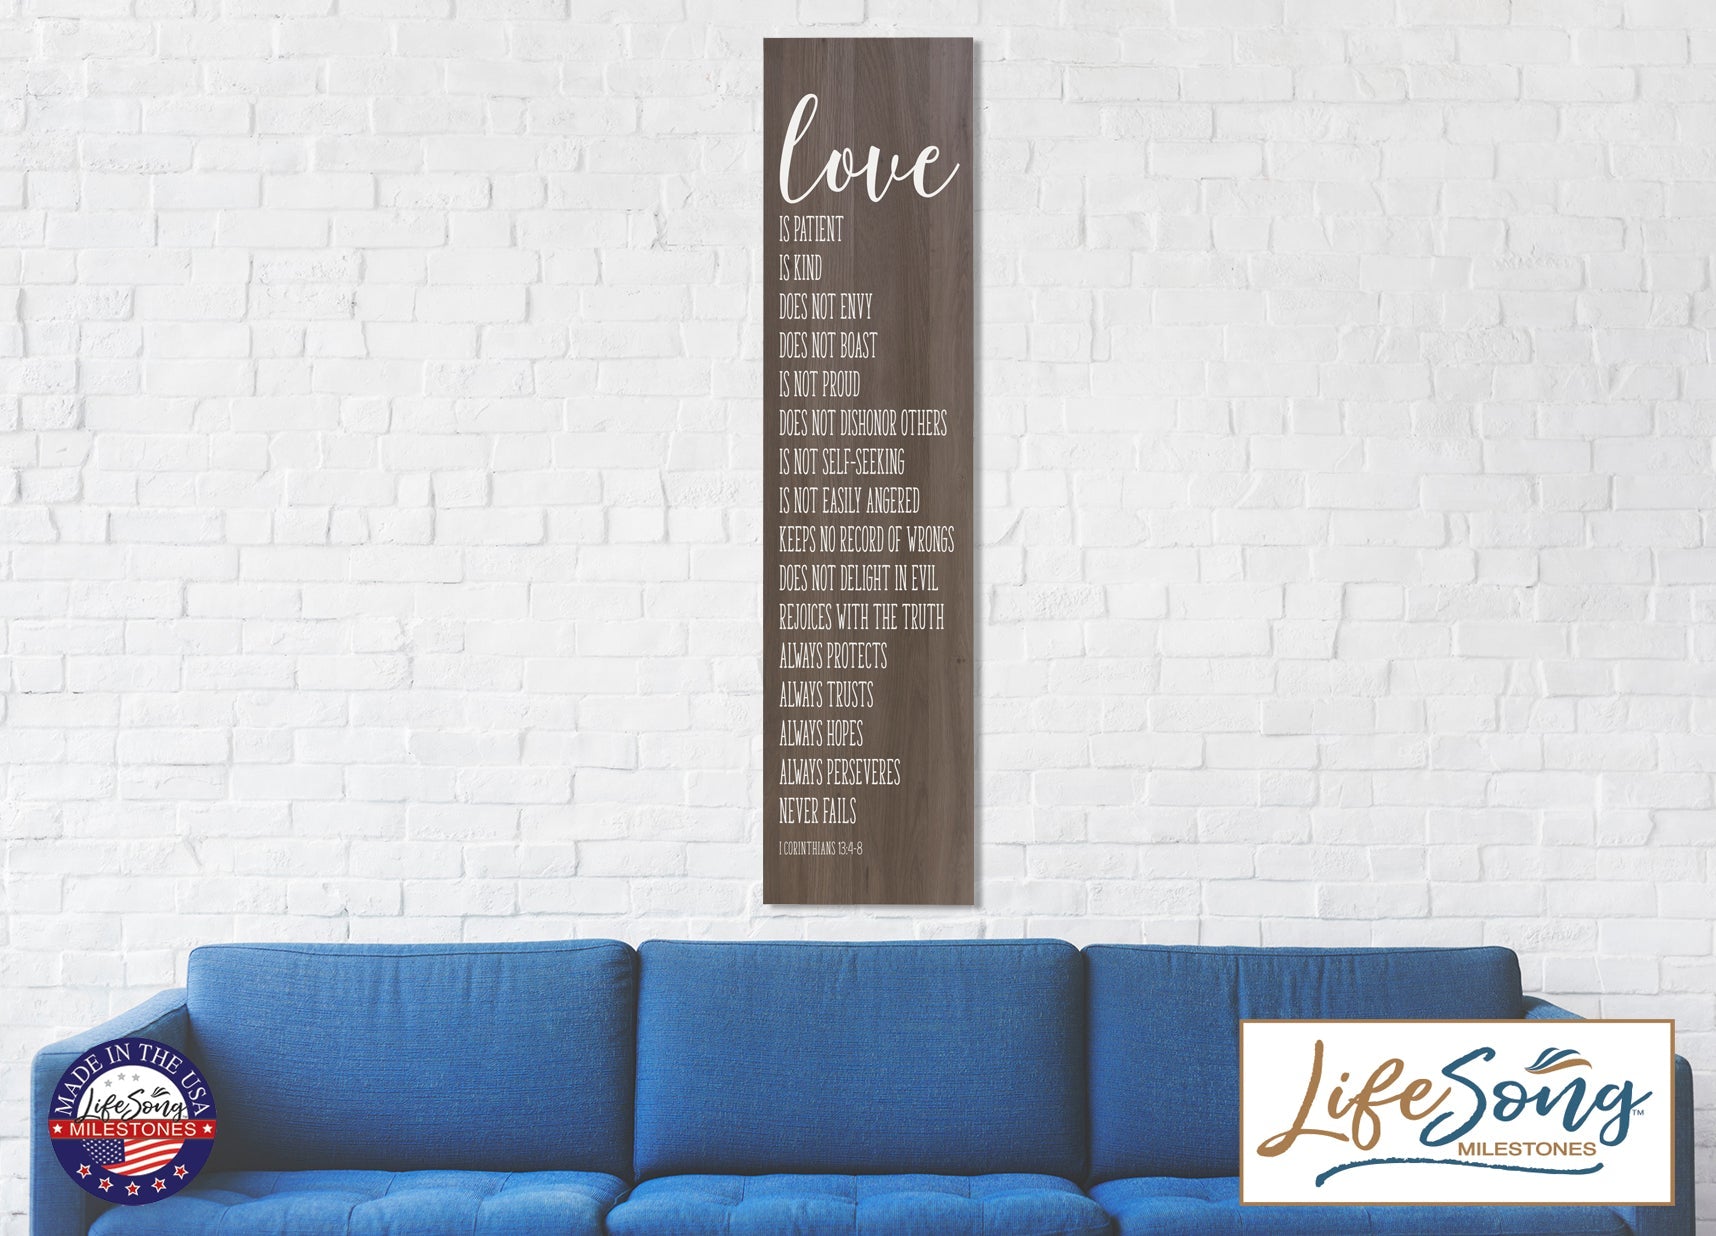 Love Is Patient, Love is Kind Decorative Wall Art Sign - LifeSong Milestones